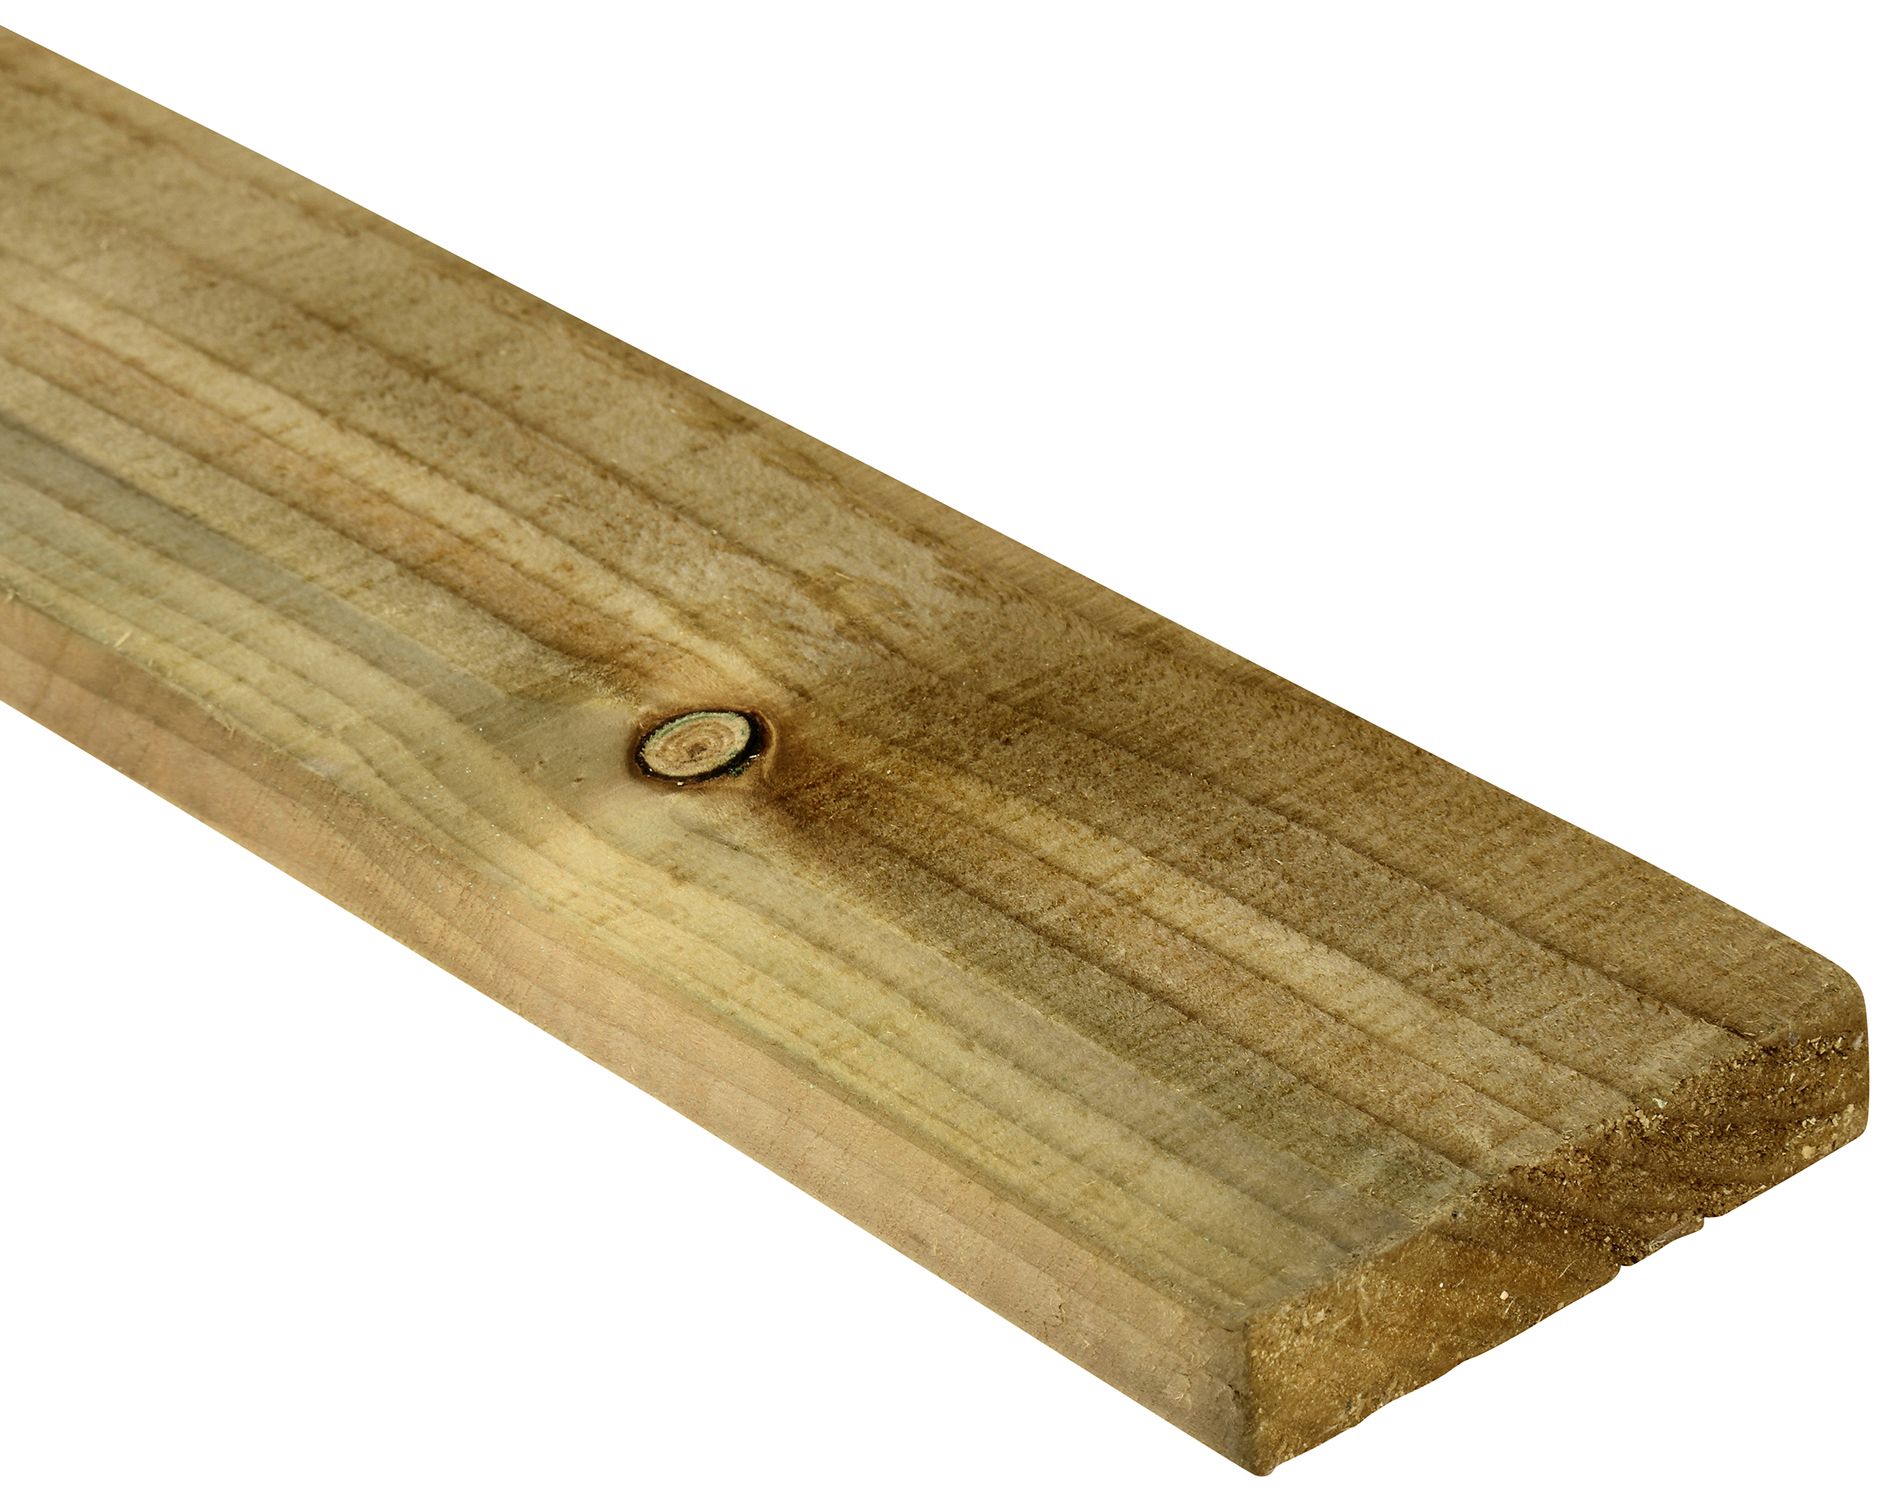 Image of Wickes Treated Sawn Timber - 22 x 100 x 1800mm